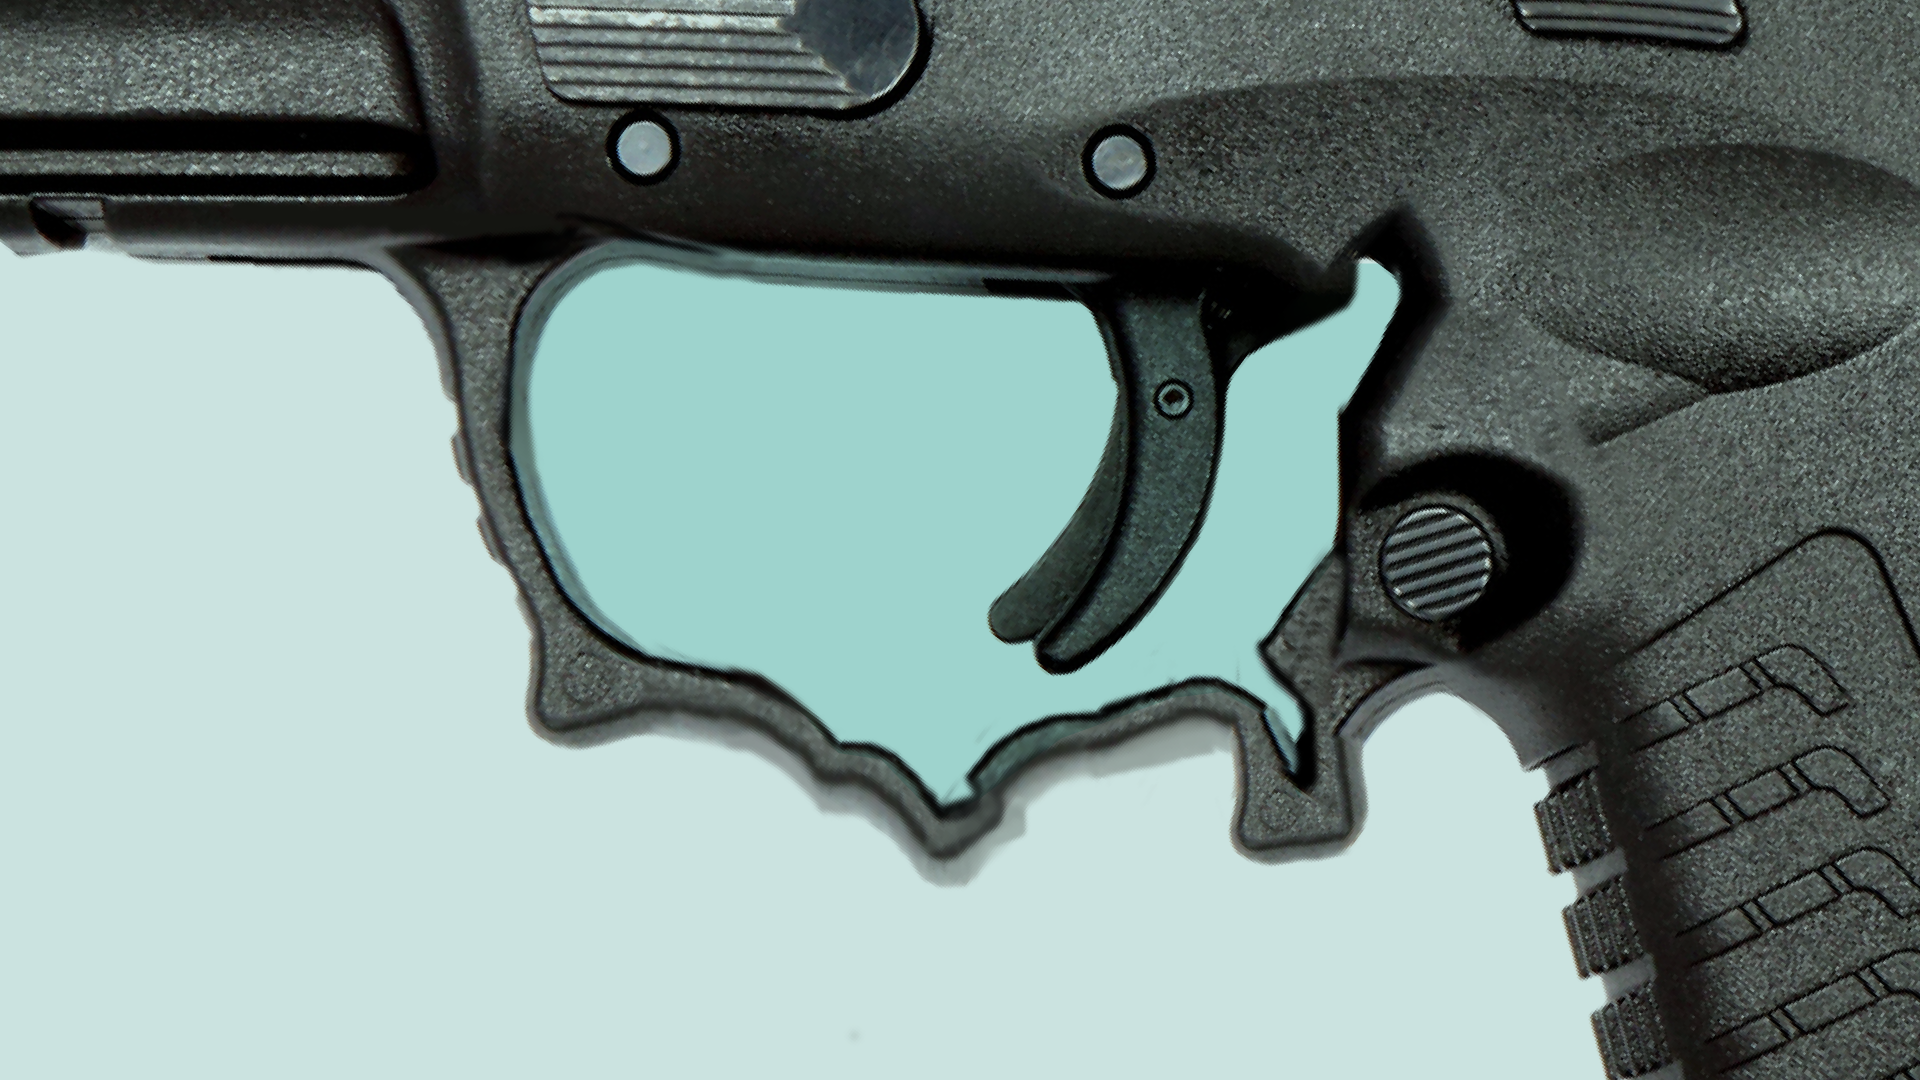 A gun whose trigger guard is in the shape of the continental United States